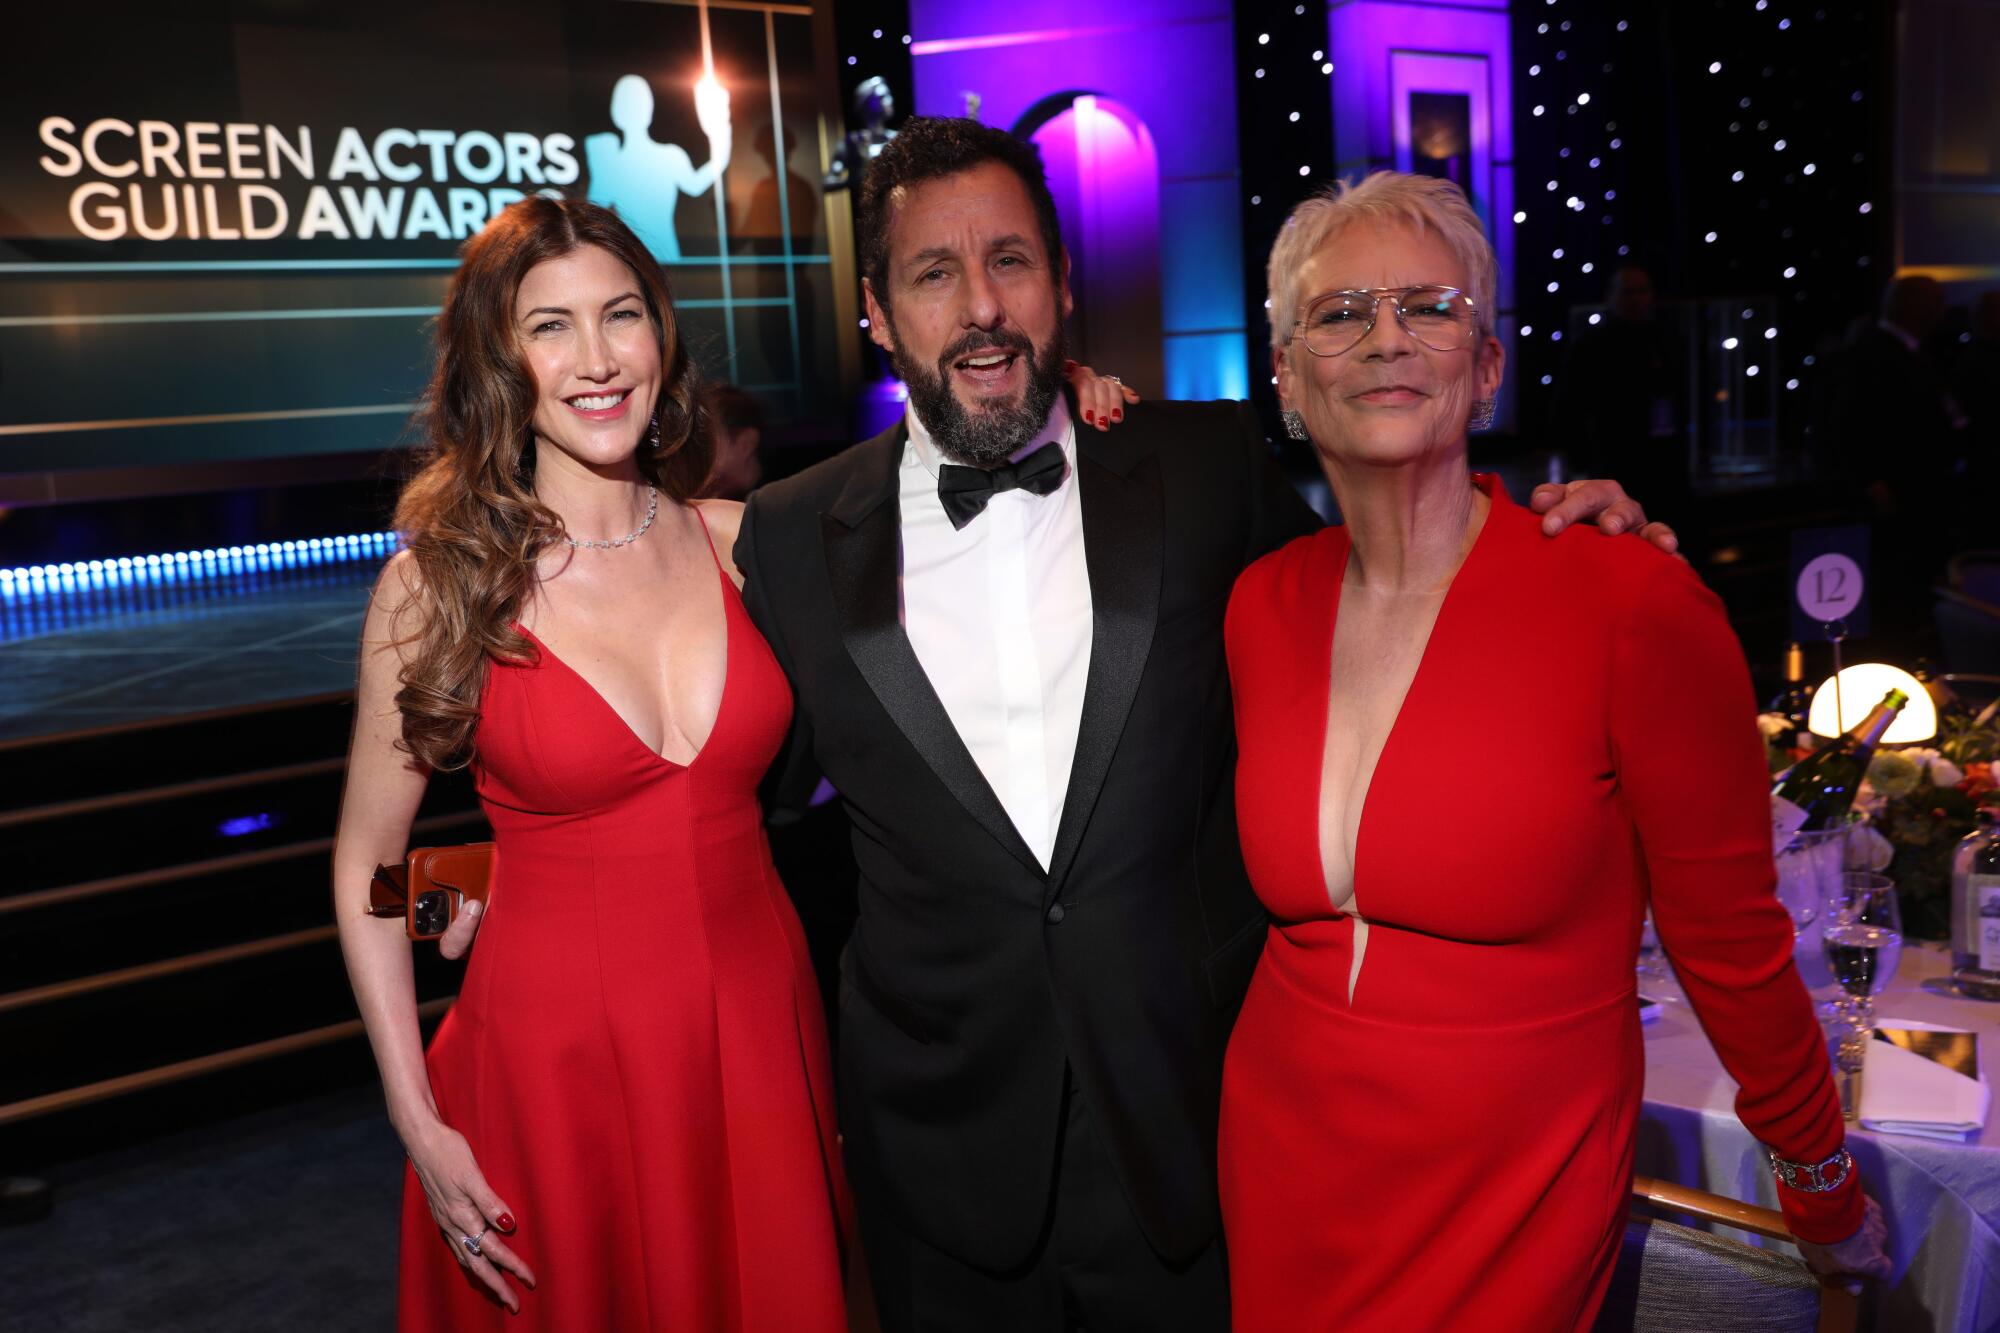 From left, Jackie Sandler, Adam Sandler, and Jamie Lee Curtis during the Cocktail Reception 